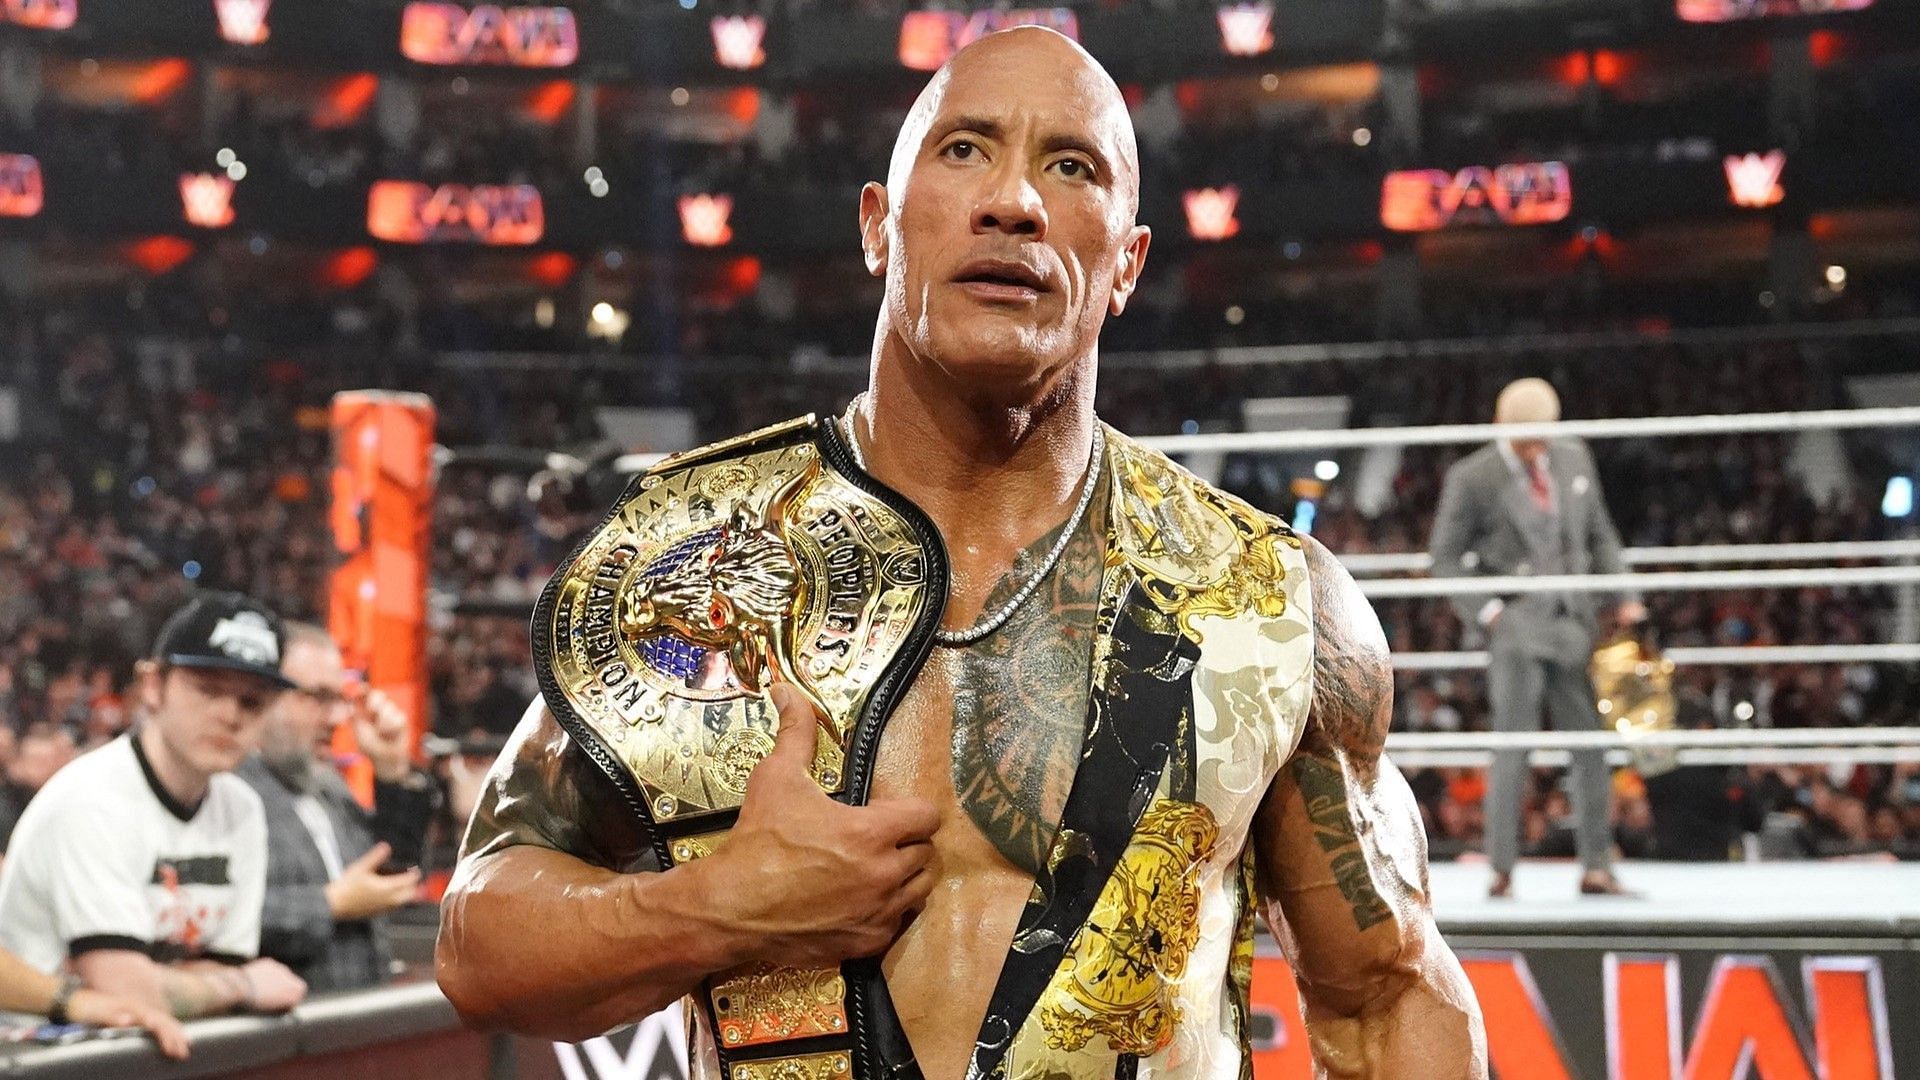 The Rock exits WWE RAW with Cody Rhodes in the background